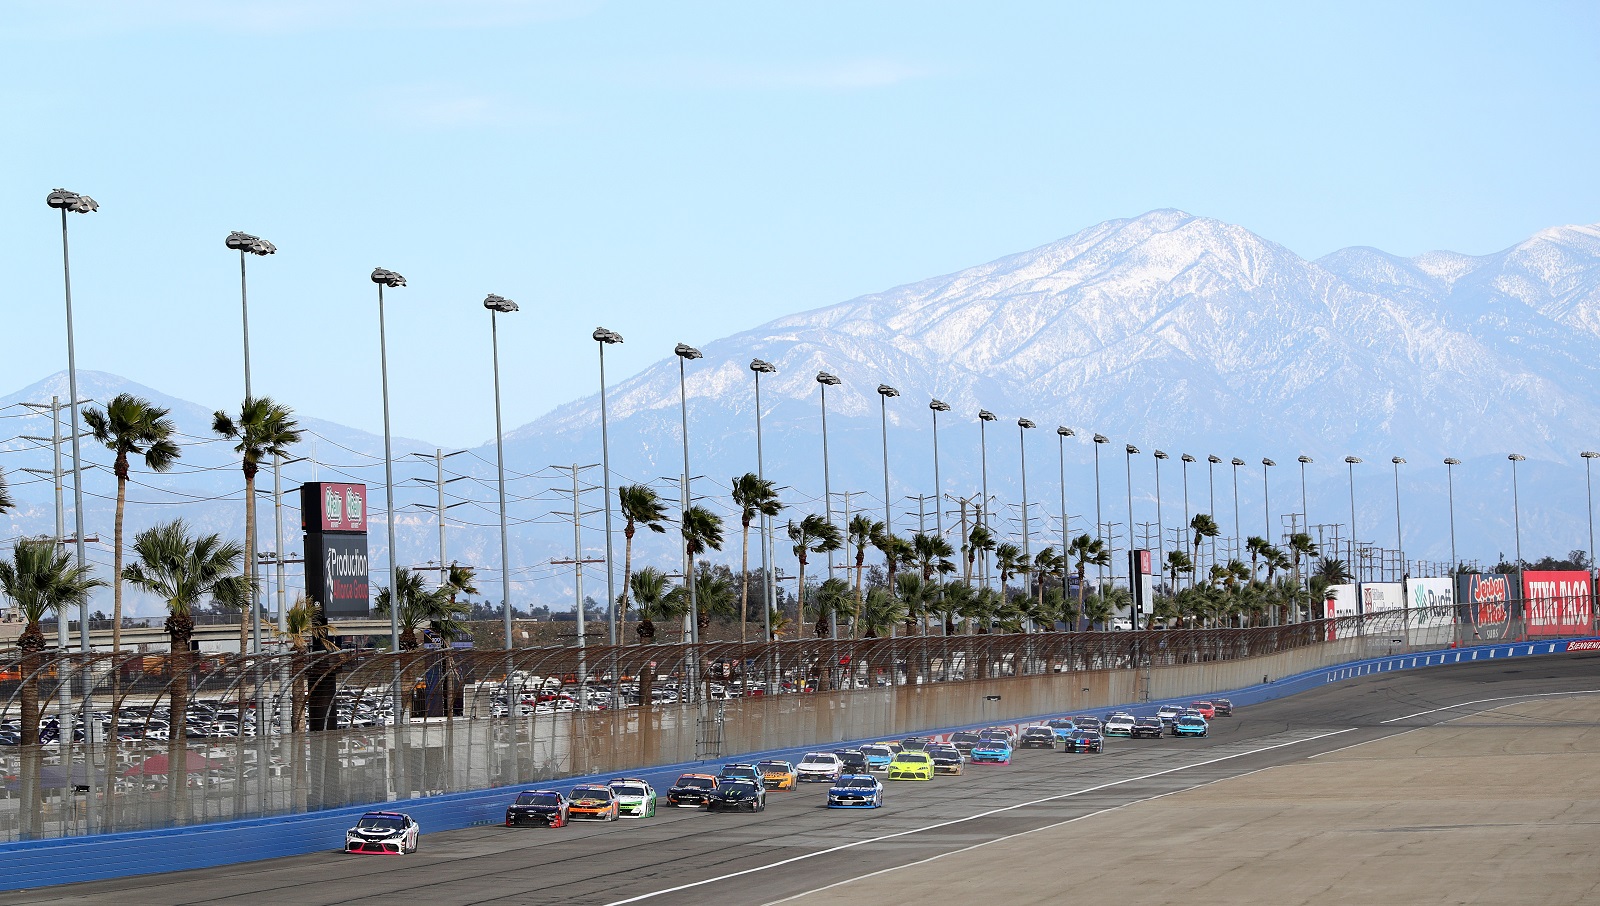 A general view of racing during the NASCAR Xfinity Series Production Alliance 300 at Auto Club Speedway on Feb. 26, 2022, in Fontana, California.